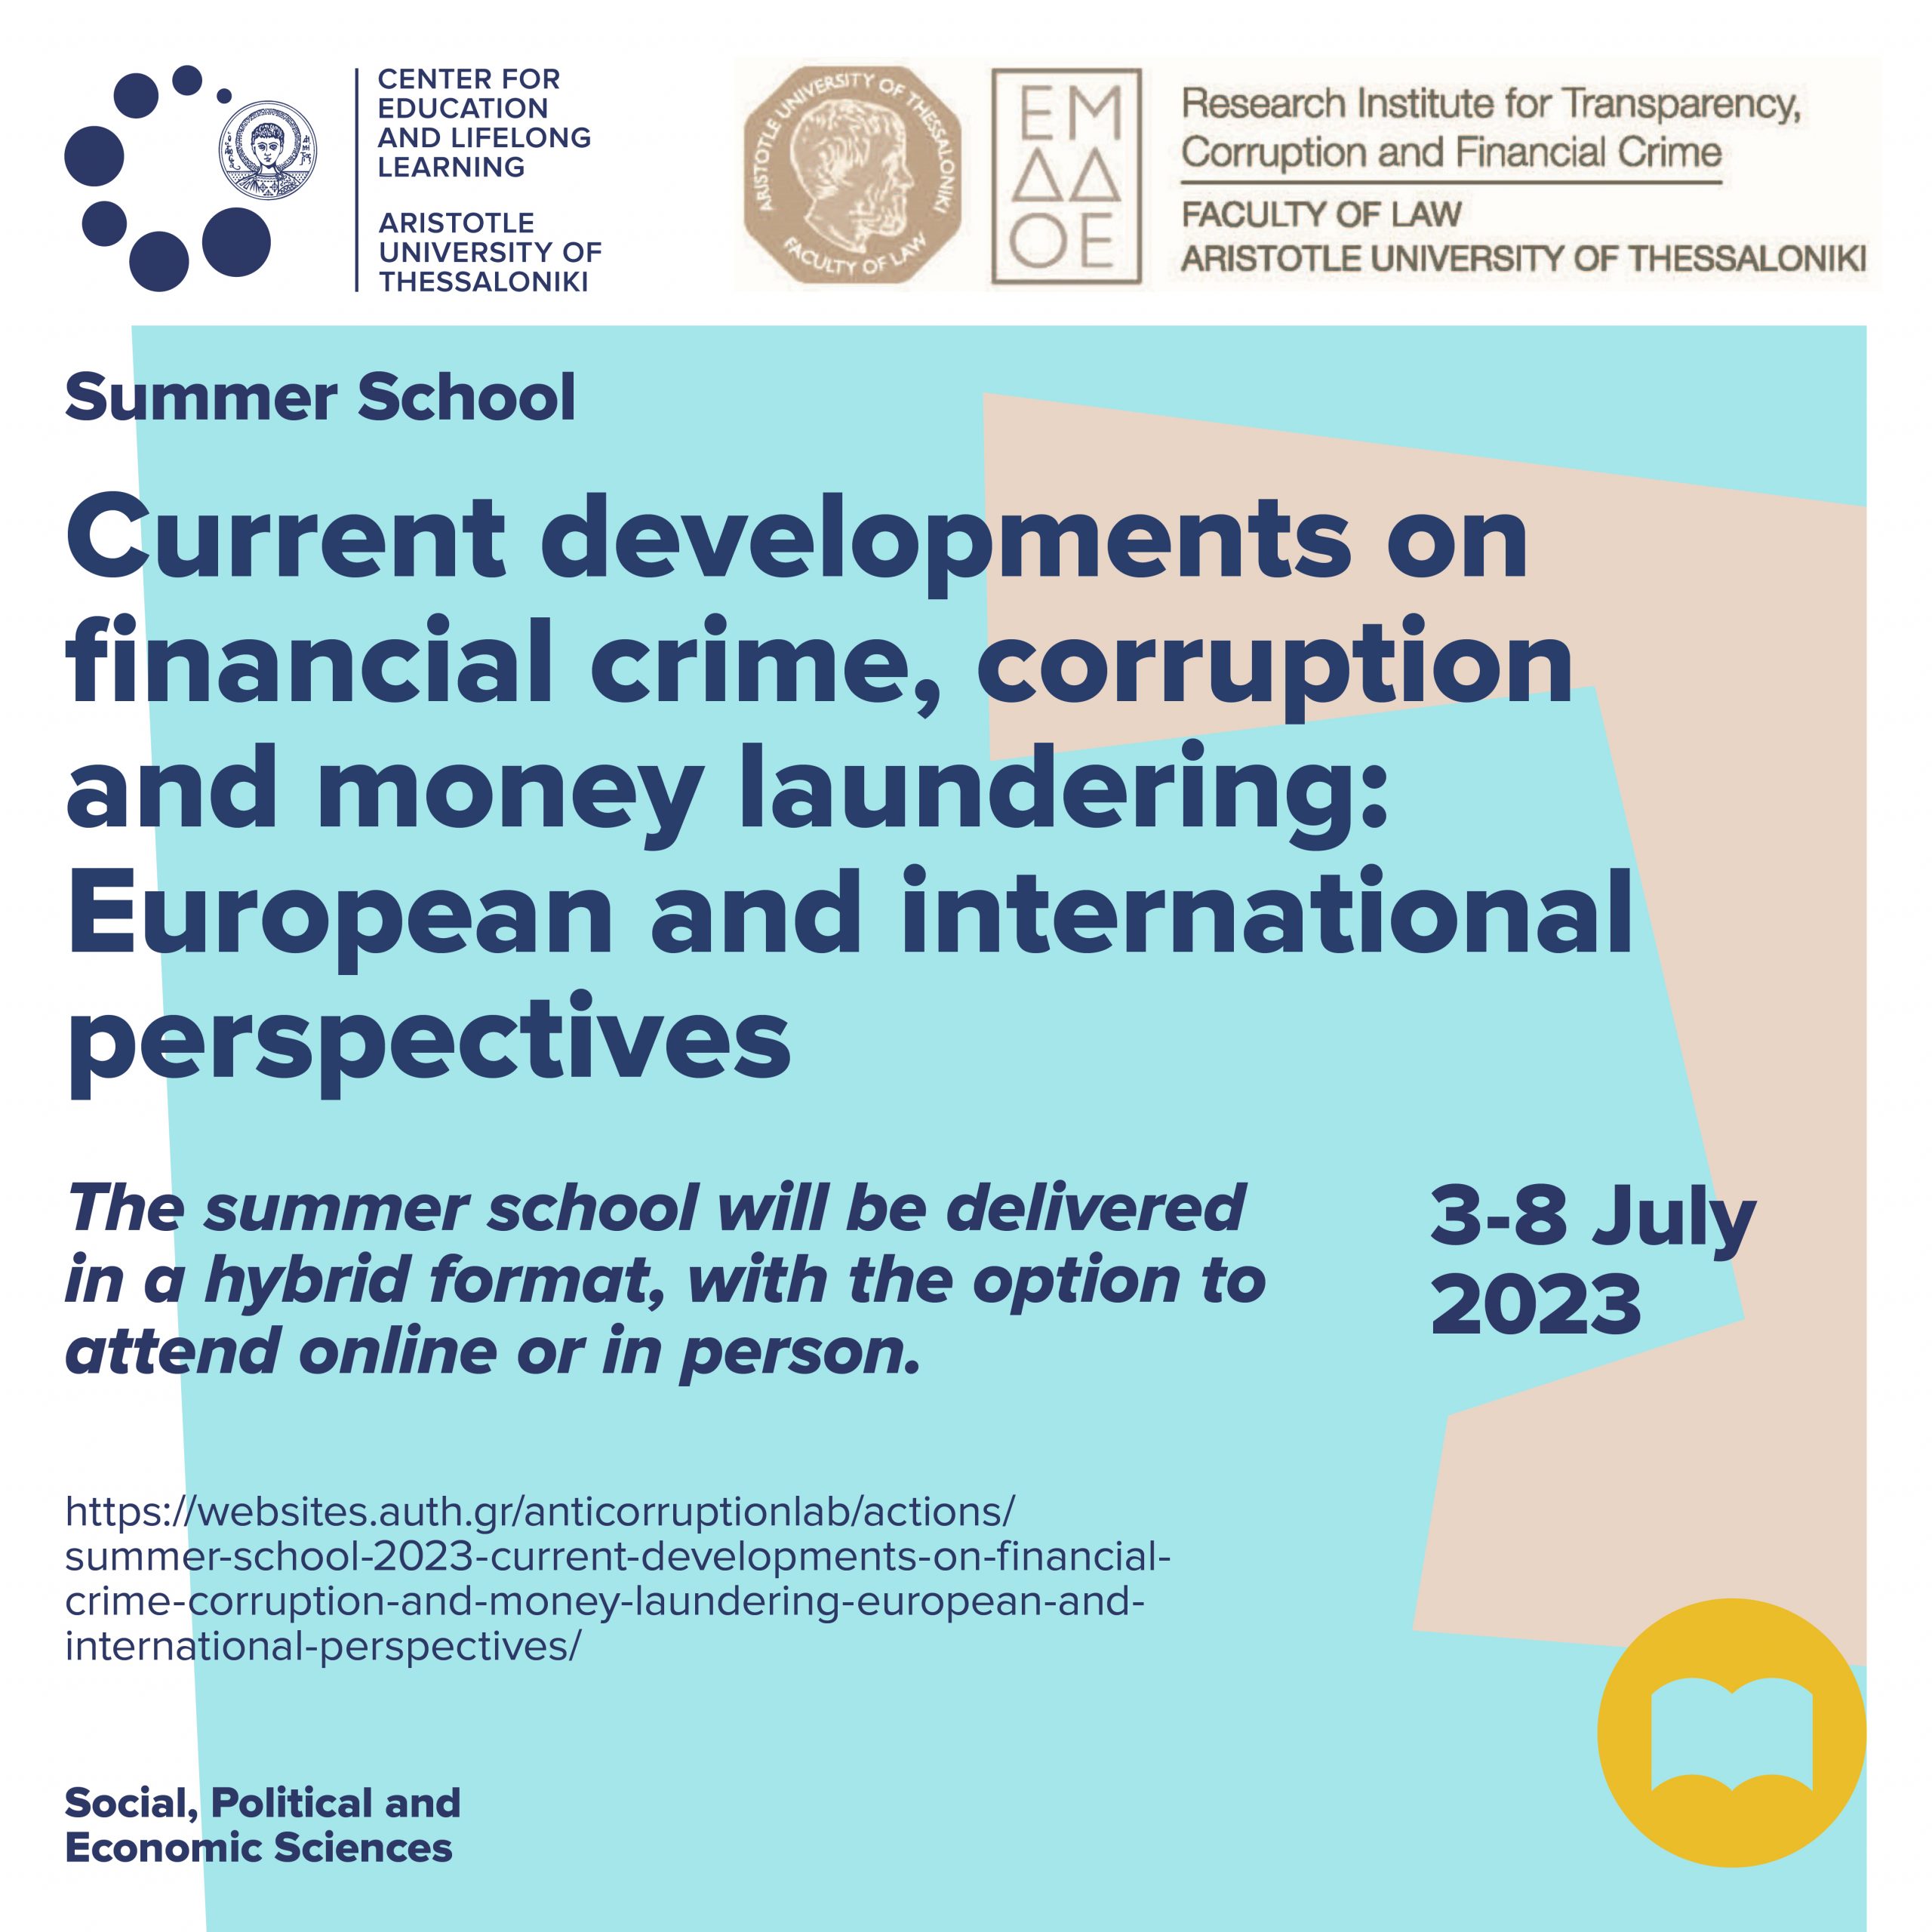 Summer school “Current developments on financial crime, corruption and money laundering: European and international perspectives”